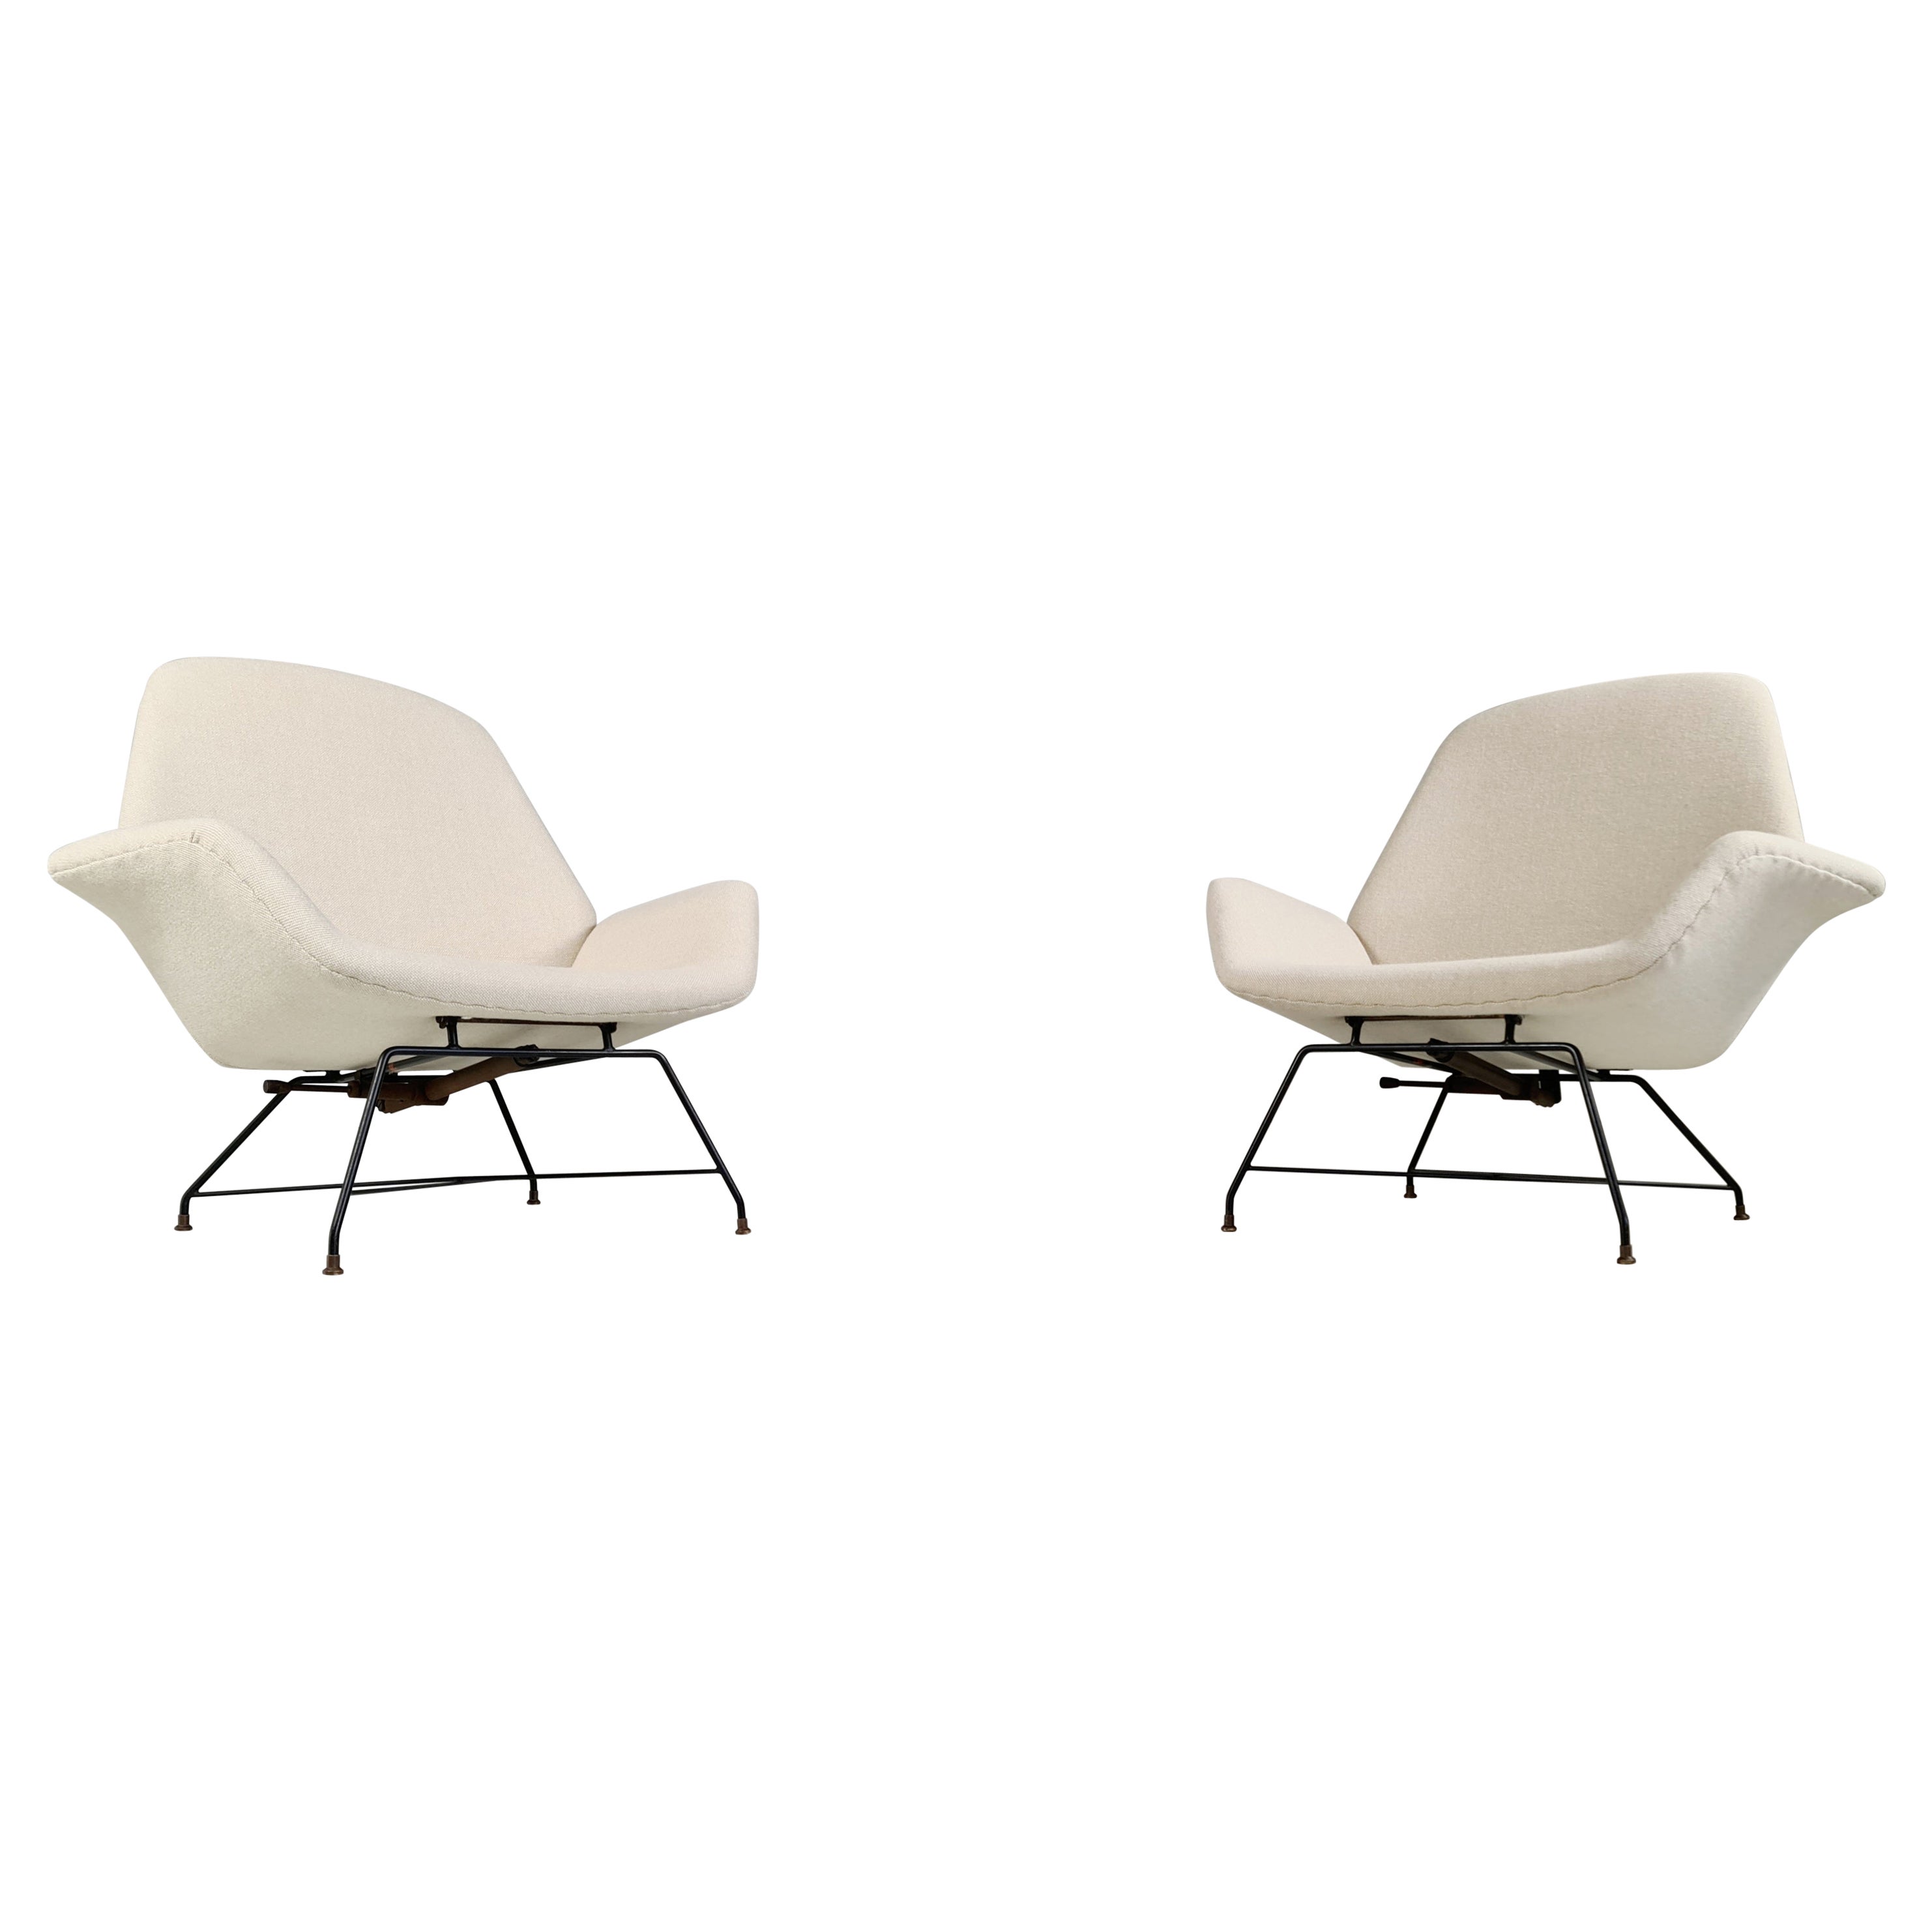 ‘Lotus’ Lounge Chairs in cream wool fabric by Augusto Bozzi for Saporiti, 1960s